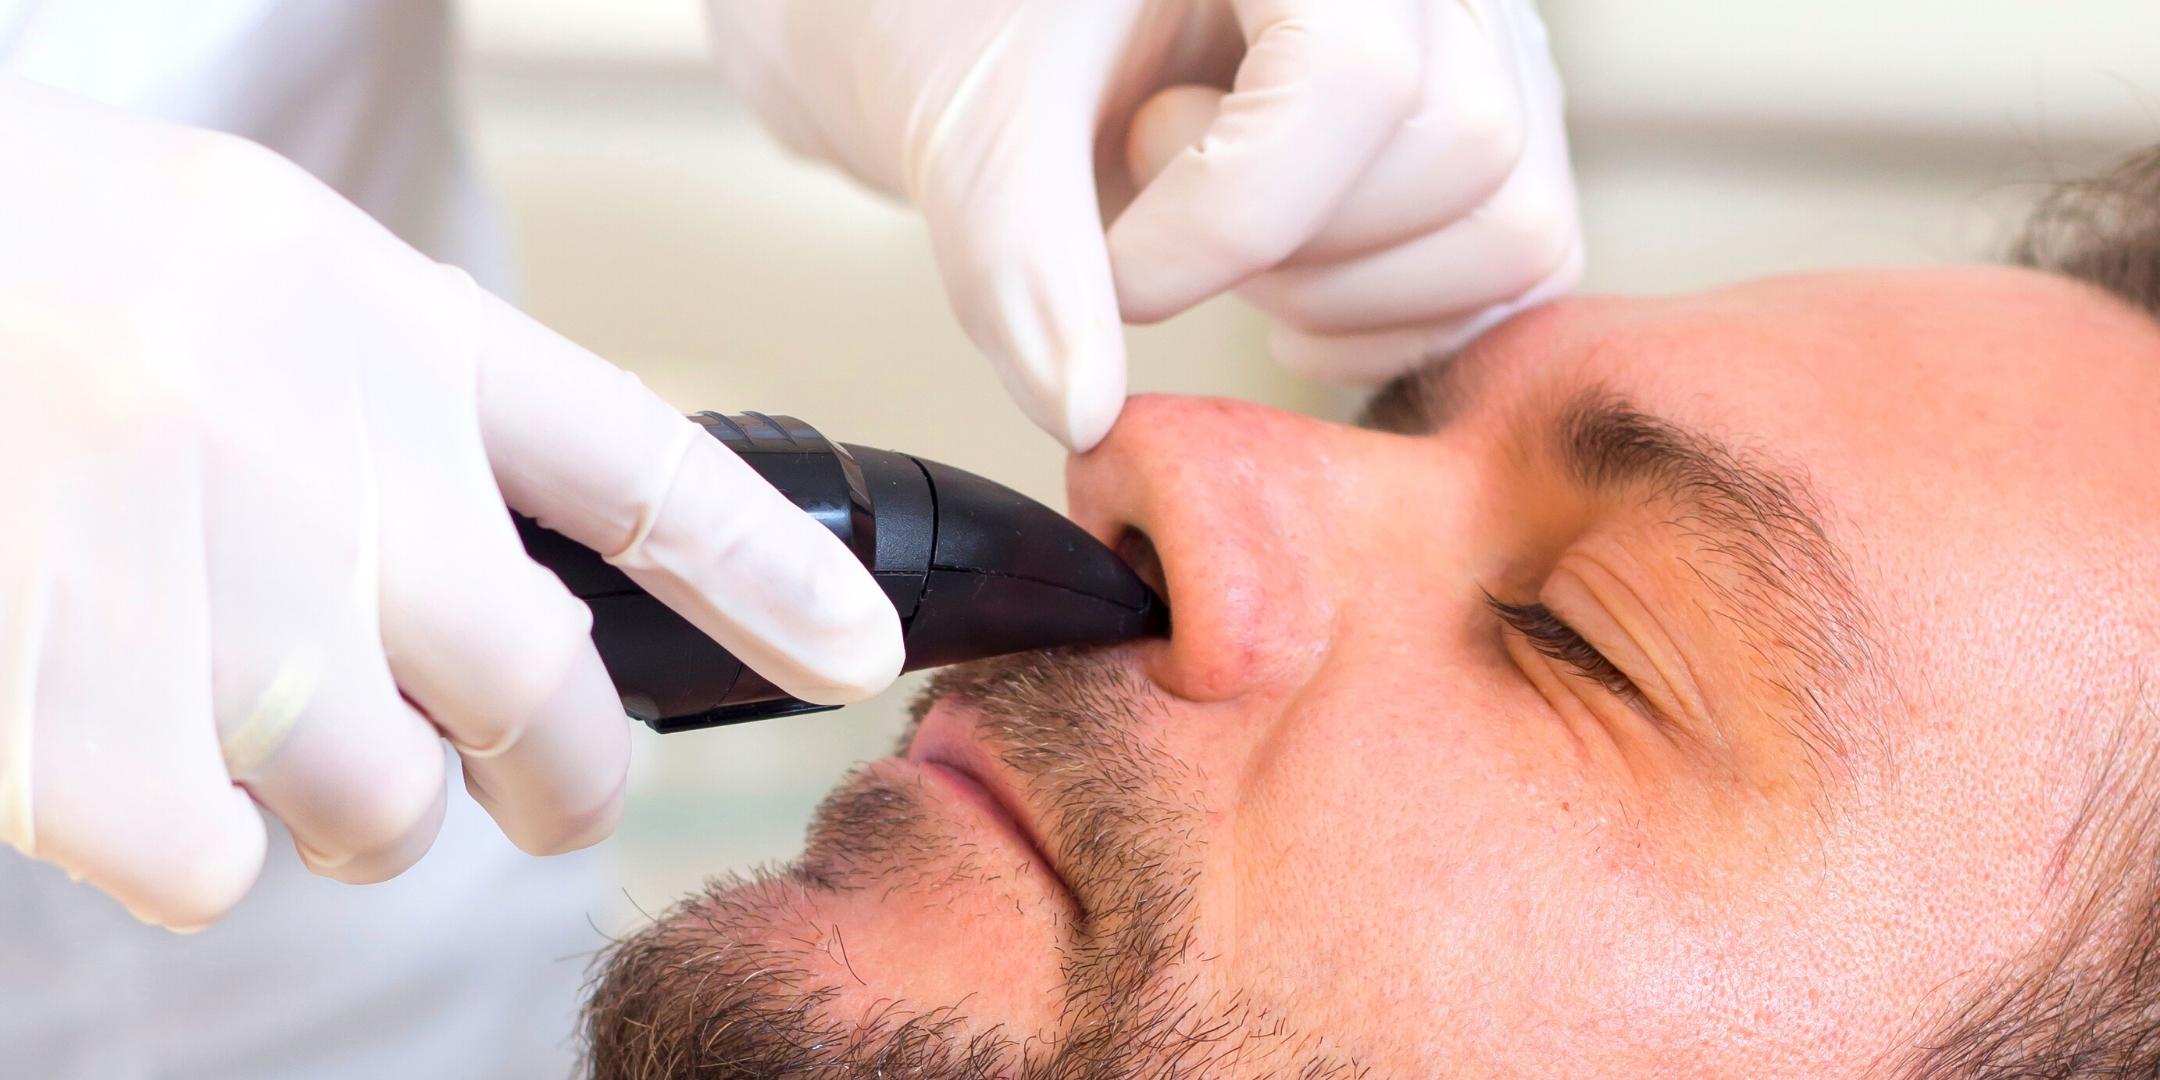 Is Laser Nose Hair Removal The Best Option?